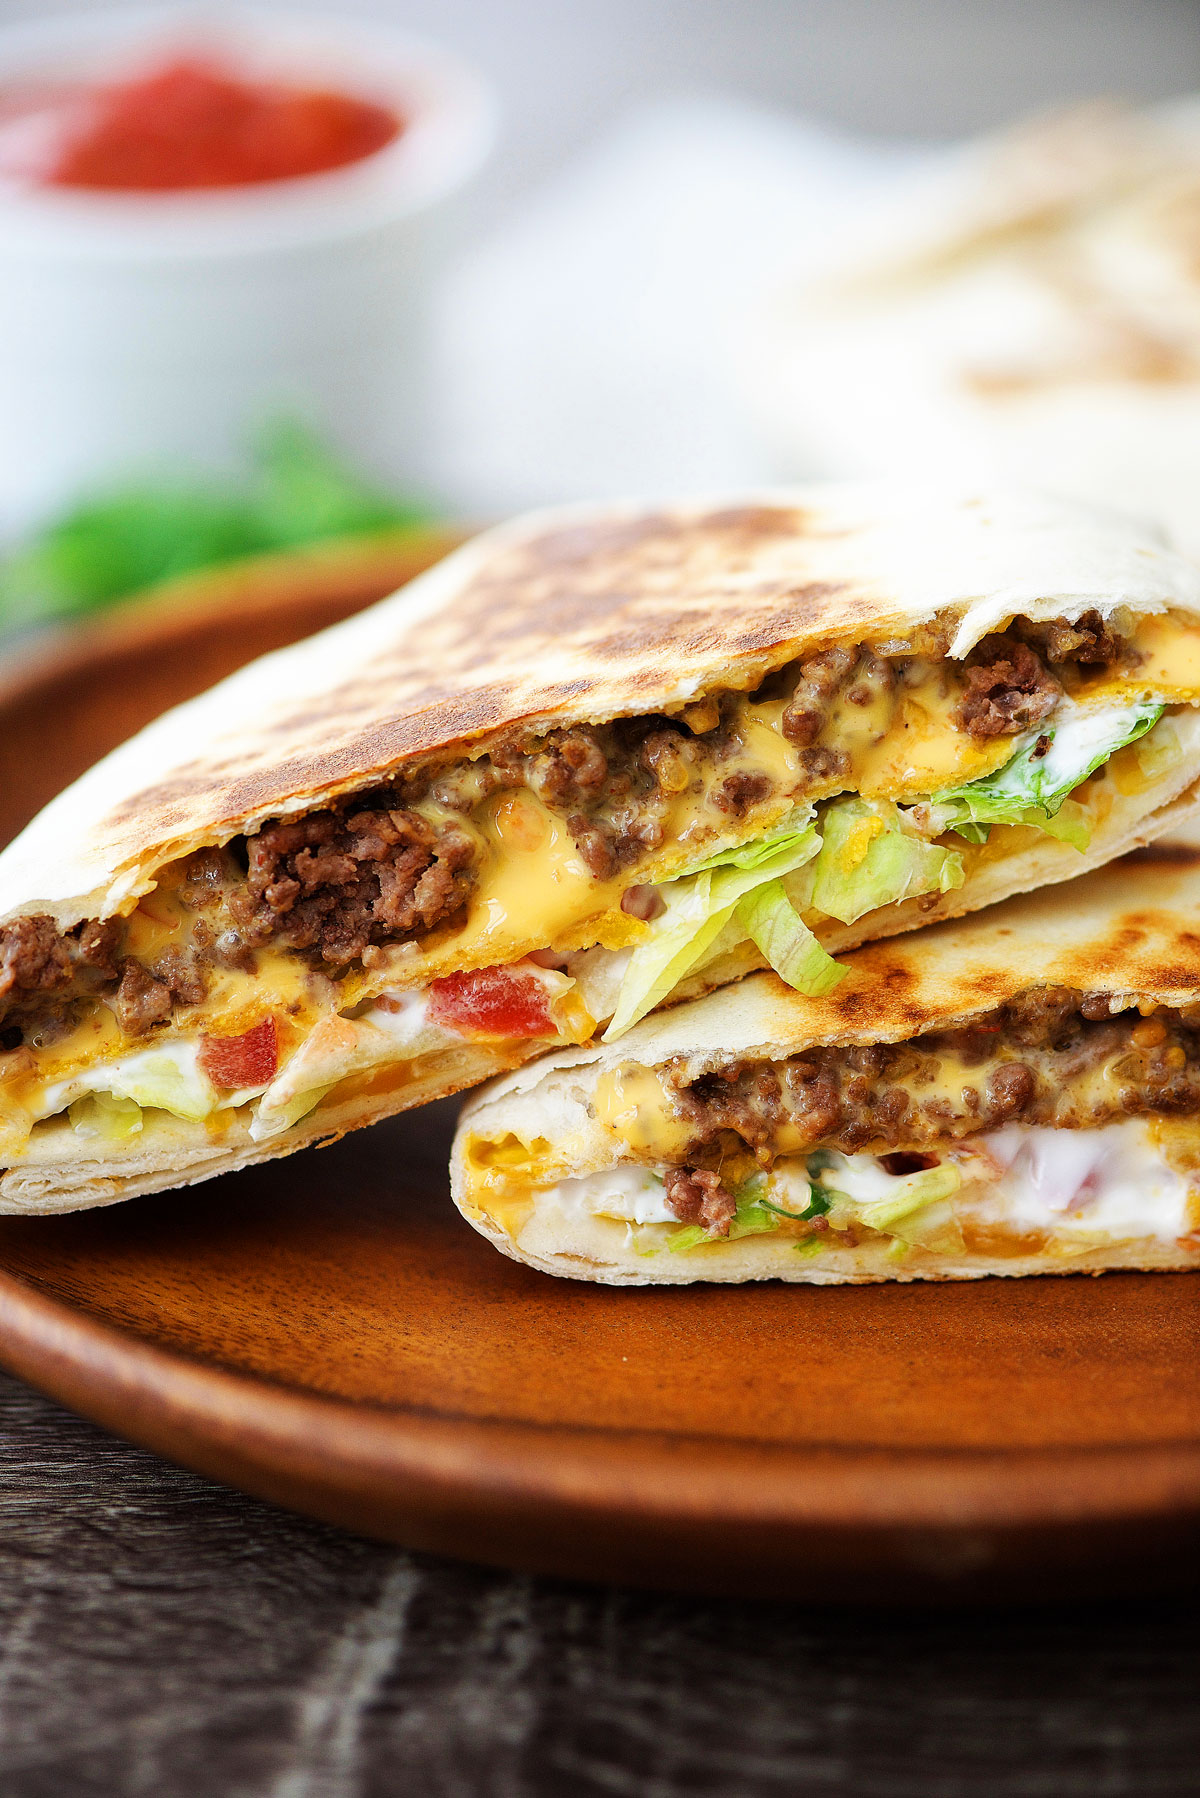 Crunchwrap Supremes are loaded with seasoned ground beef, nacho cheese, sour cream and a hidden corn tortilla all wrapped inside a large flour tortilla. Life-in-the-Lofthouse.com